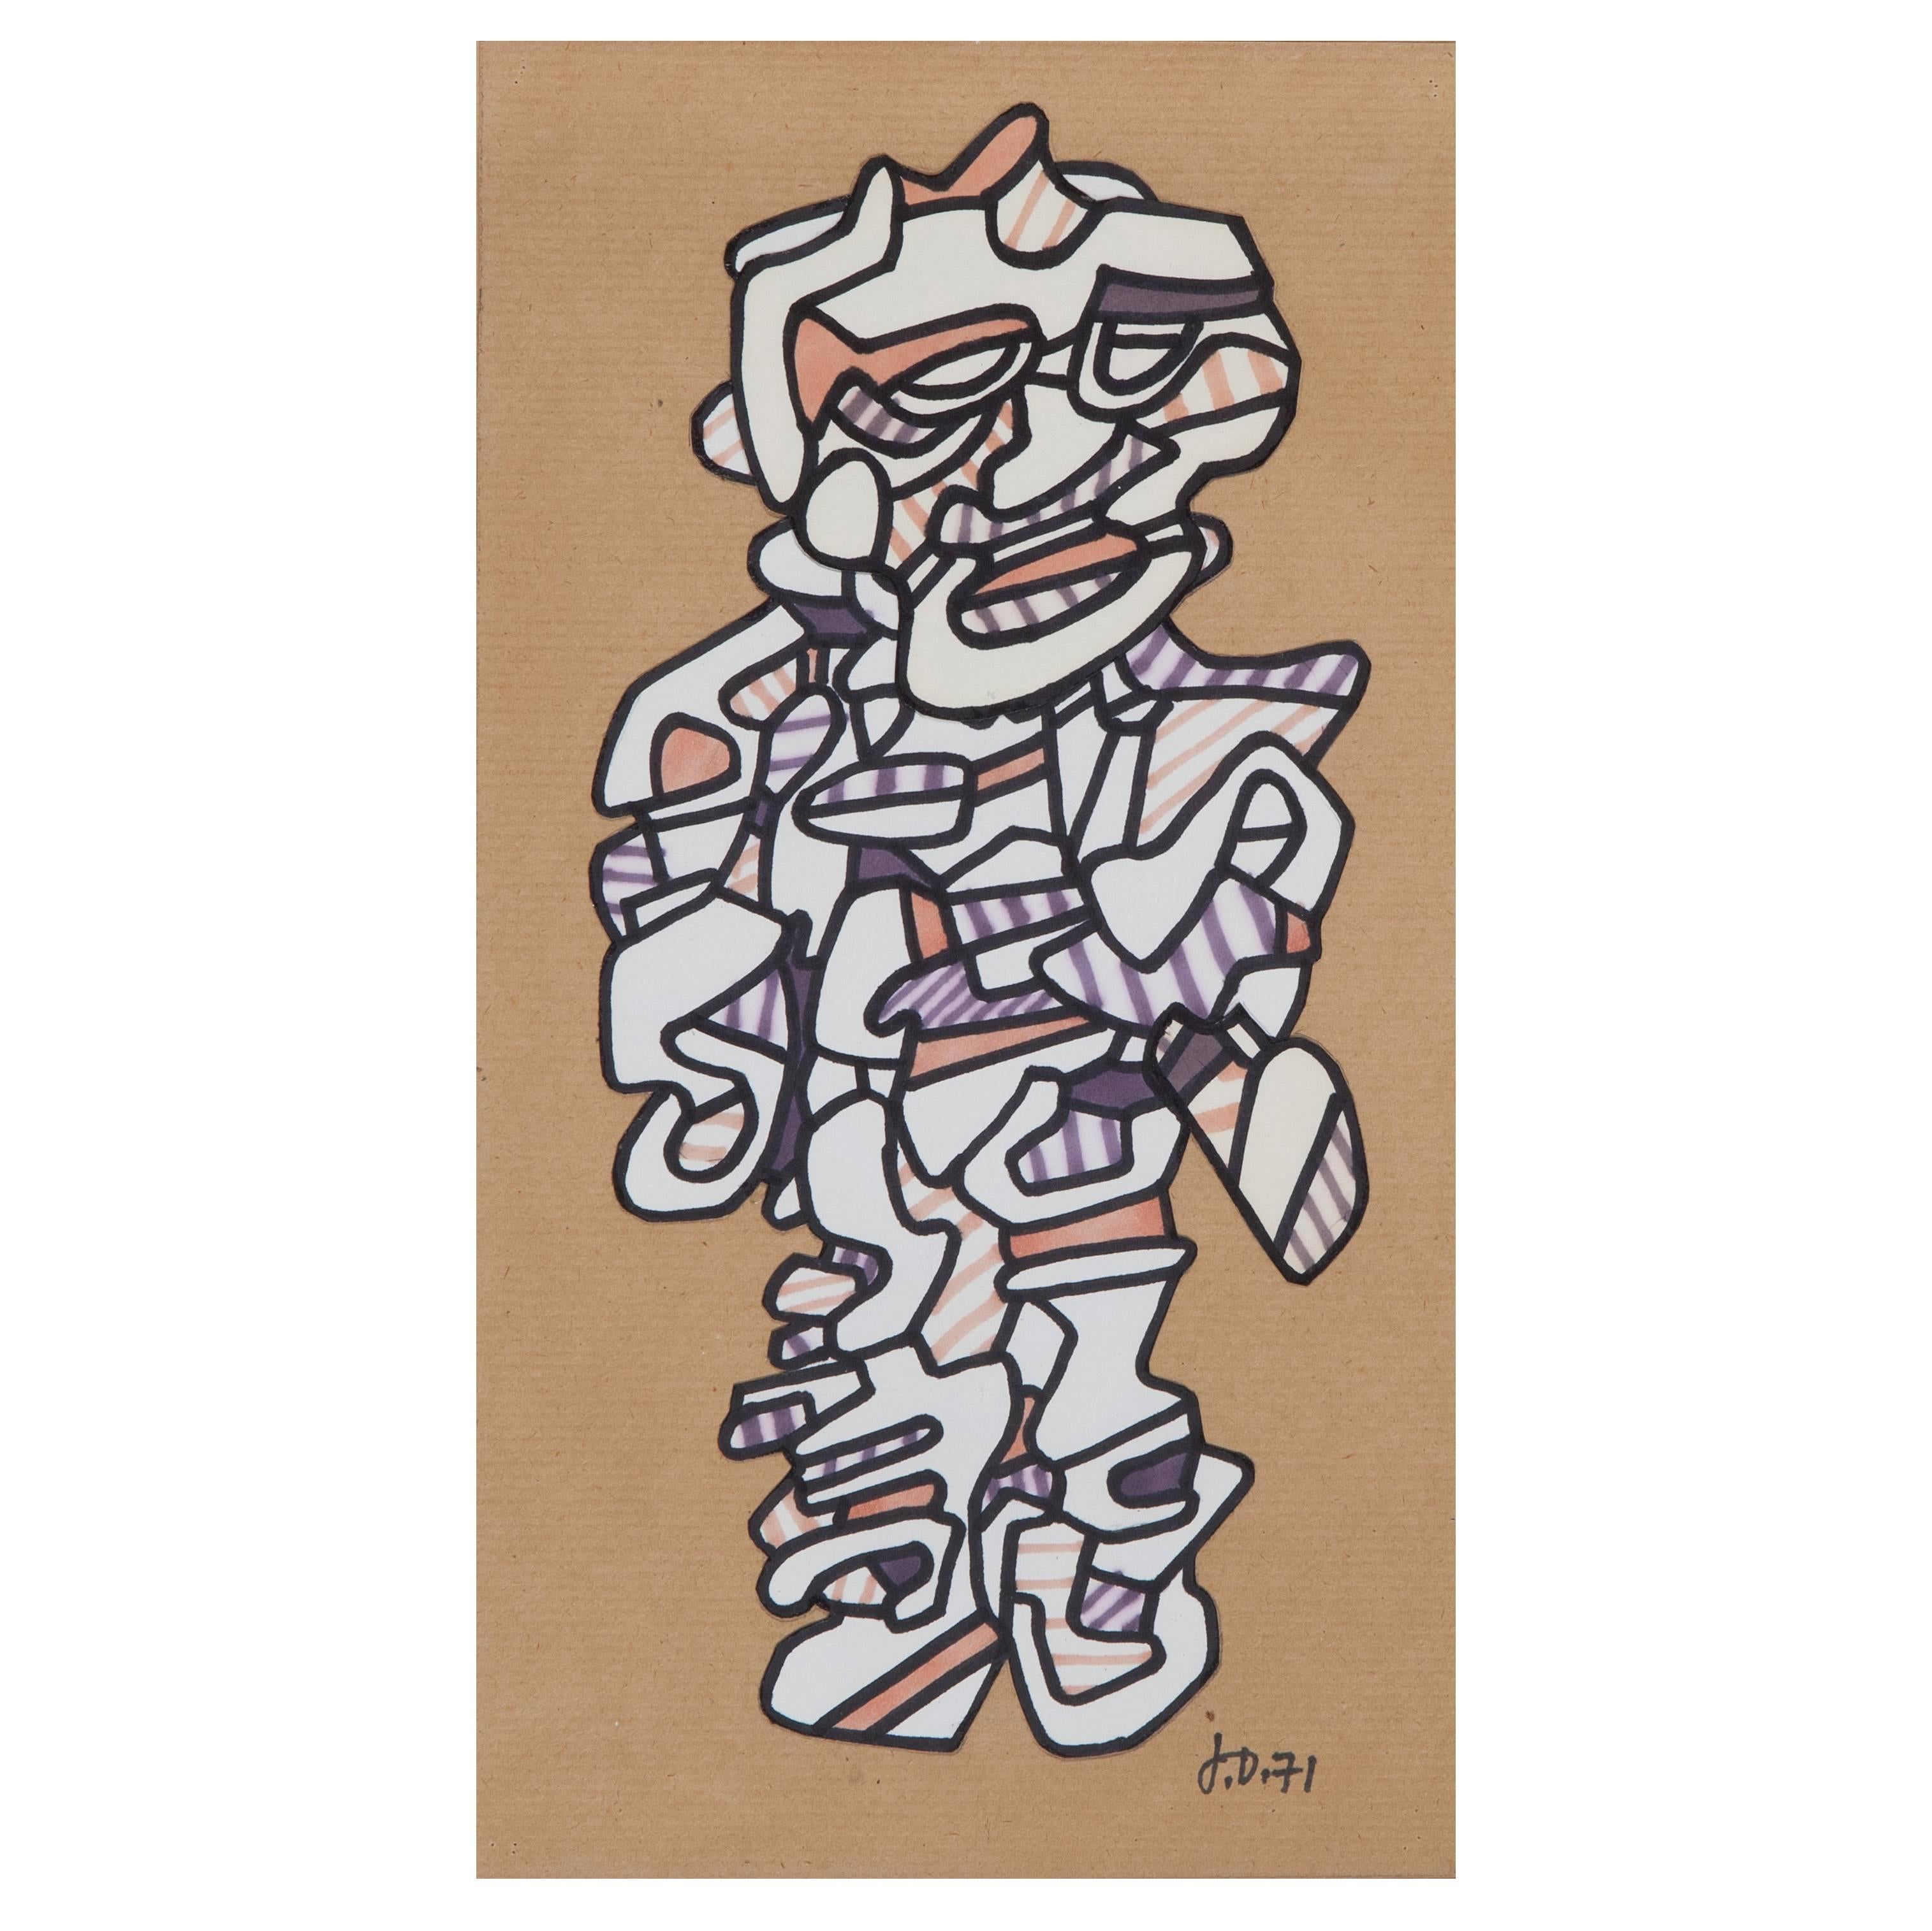 Jean Dubuffet '1901-1985, ' "Personnage 1971, " Marker Pen on Paper, Signed